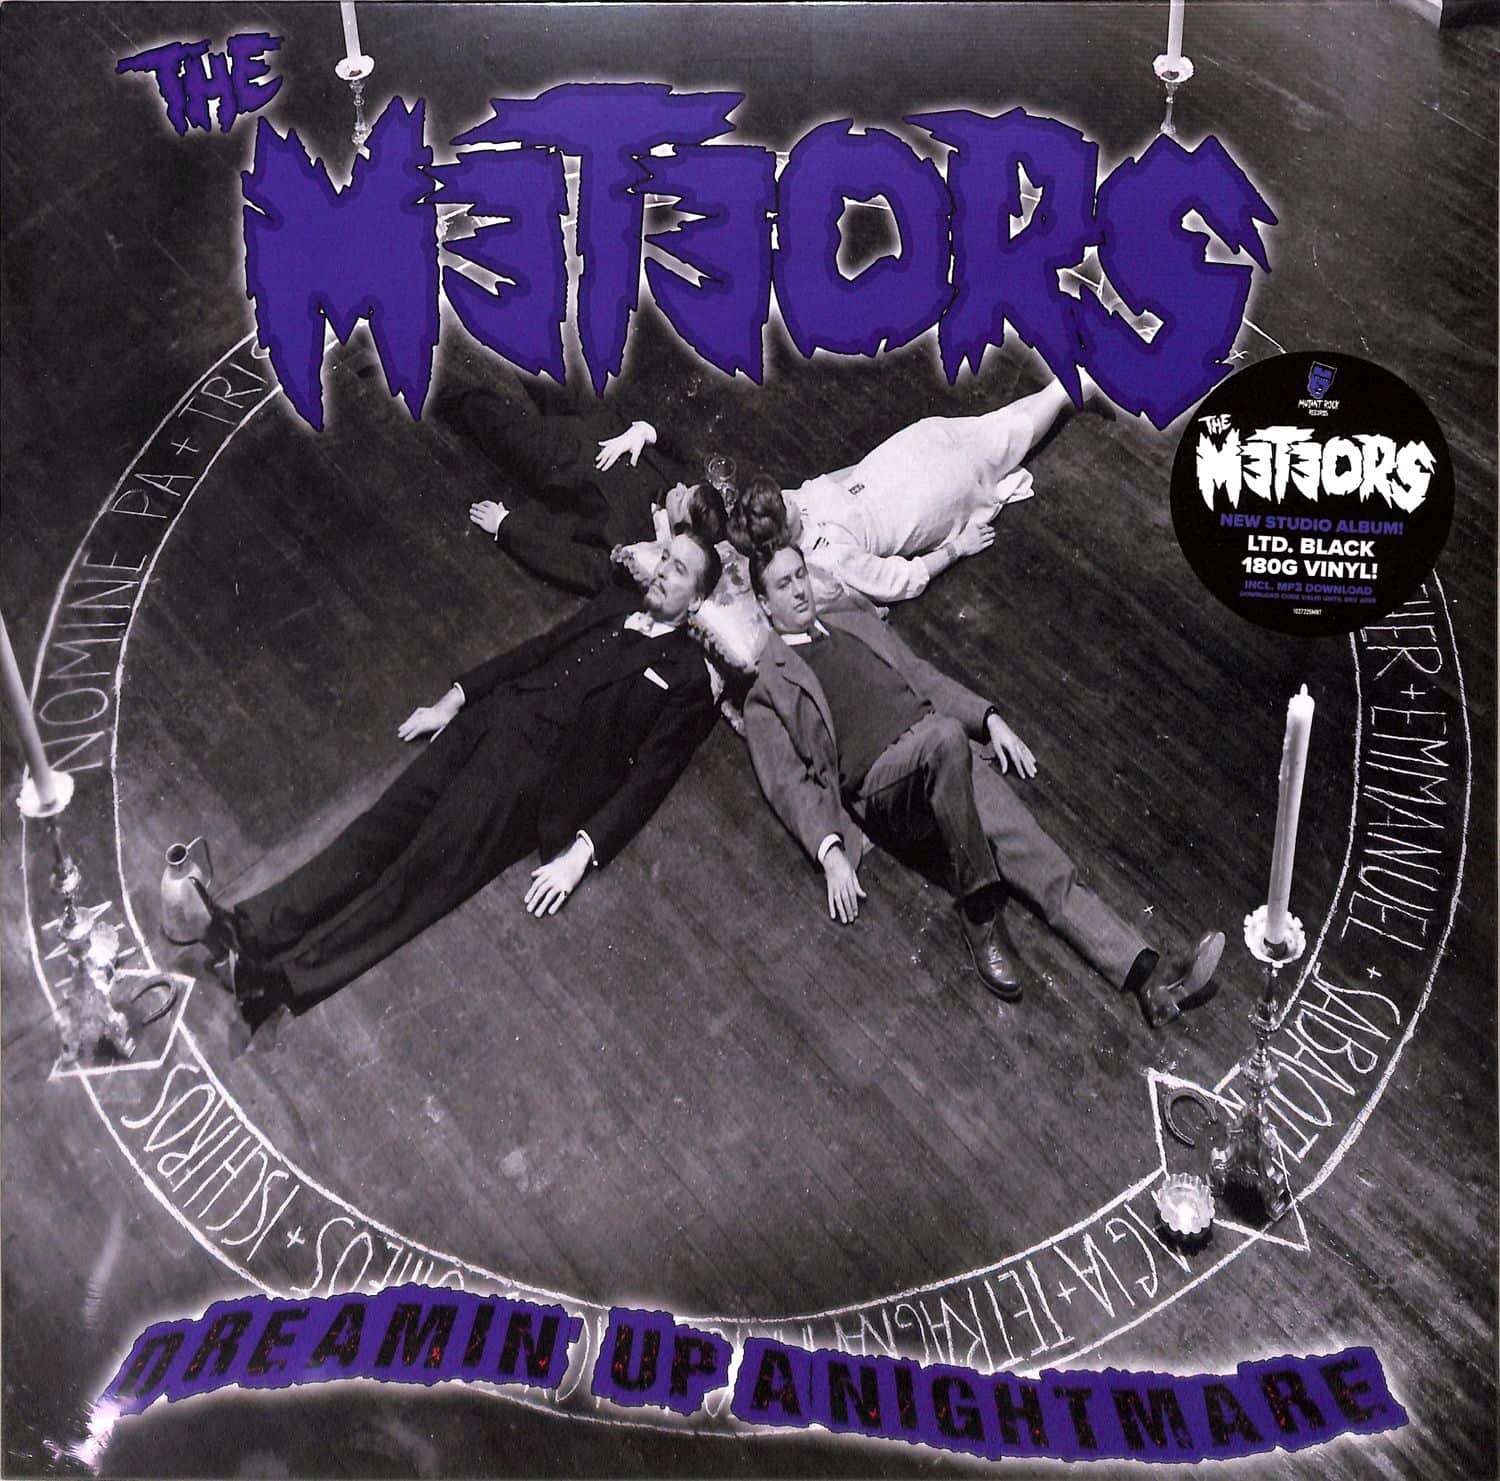 The Meteors - DREAMIN UP A NIGHTMARE 